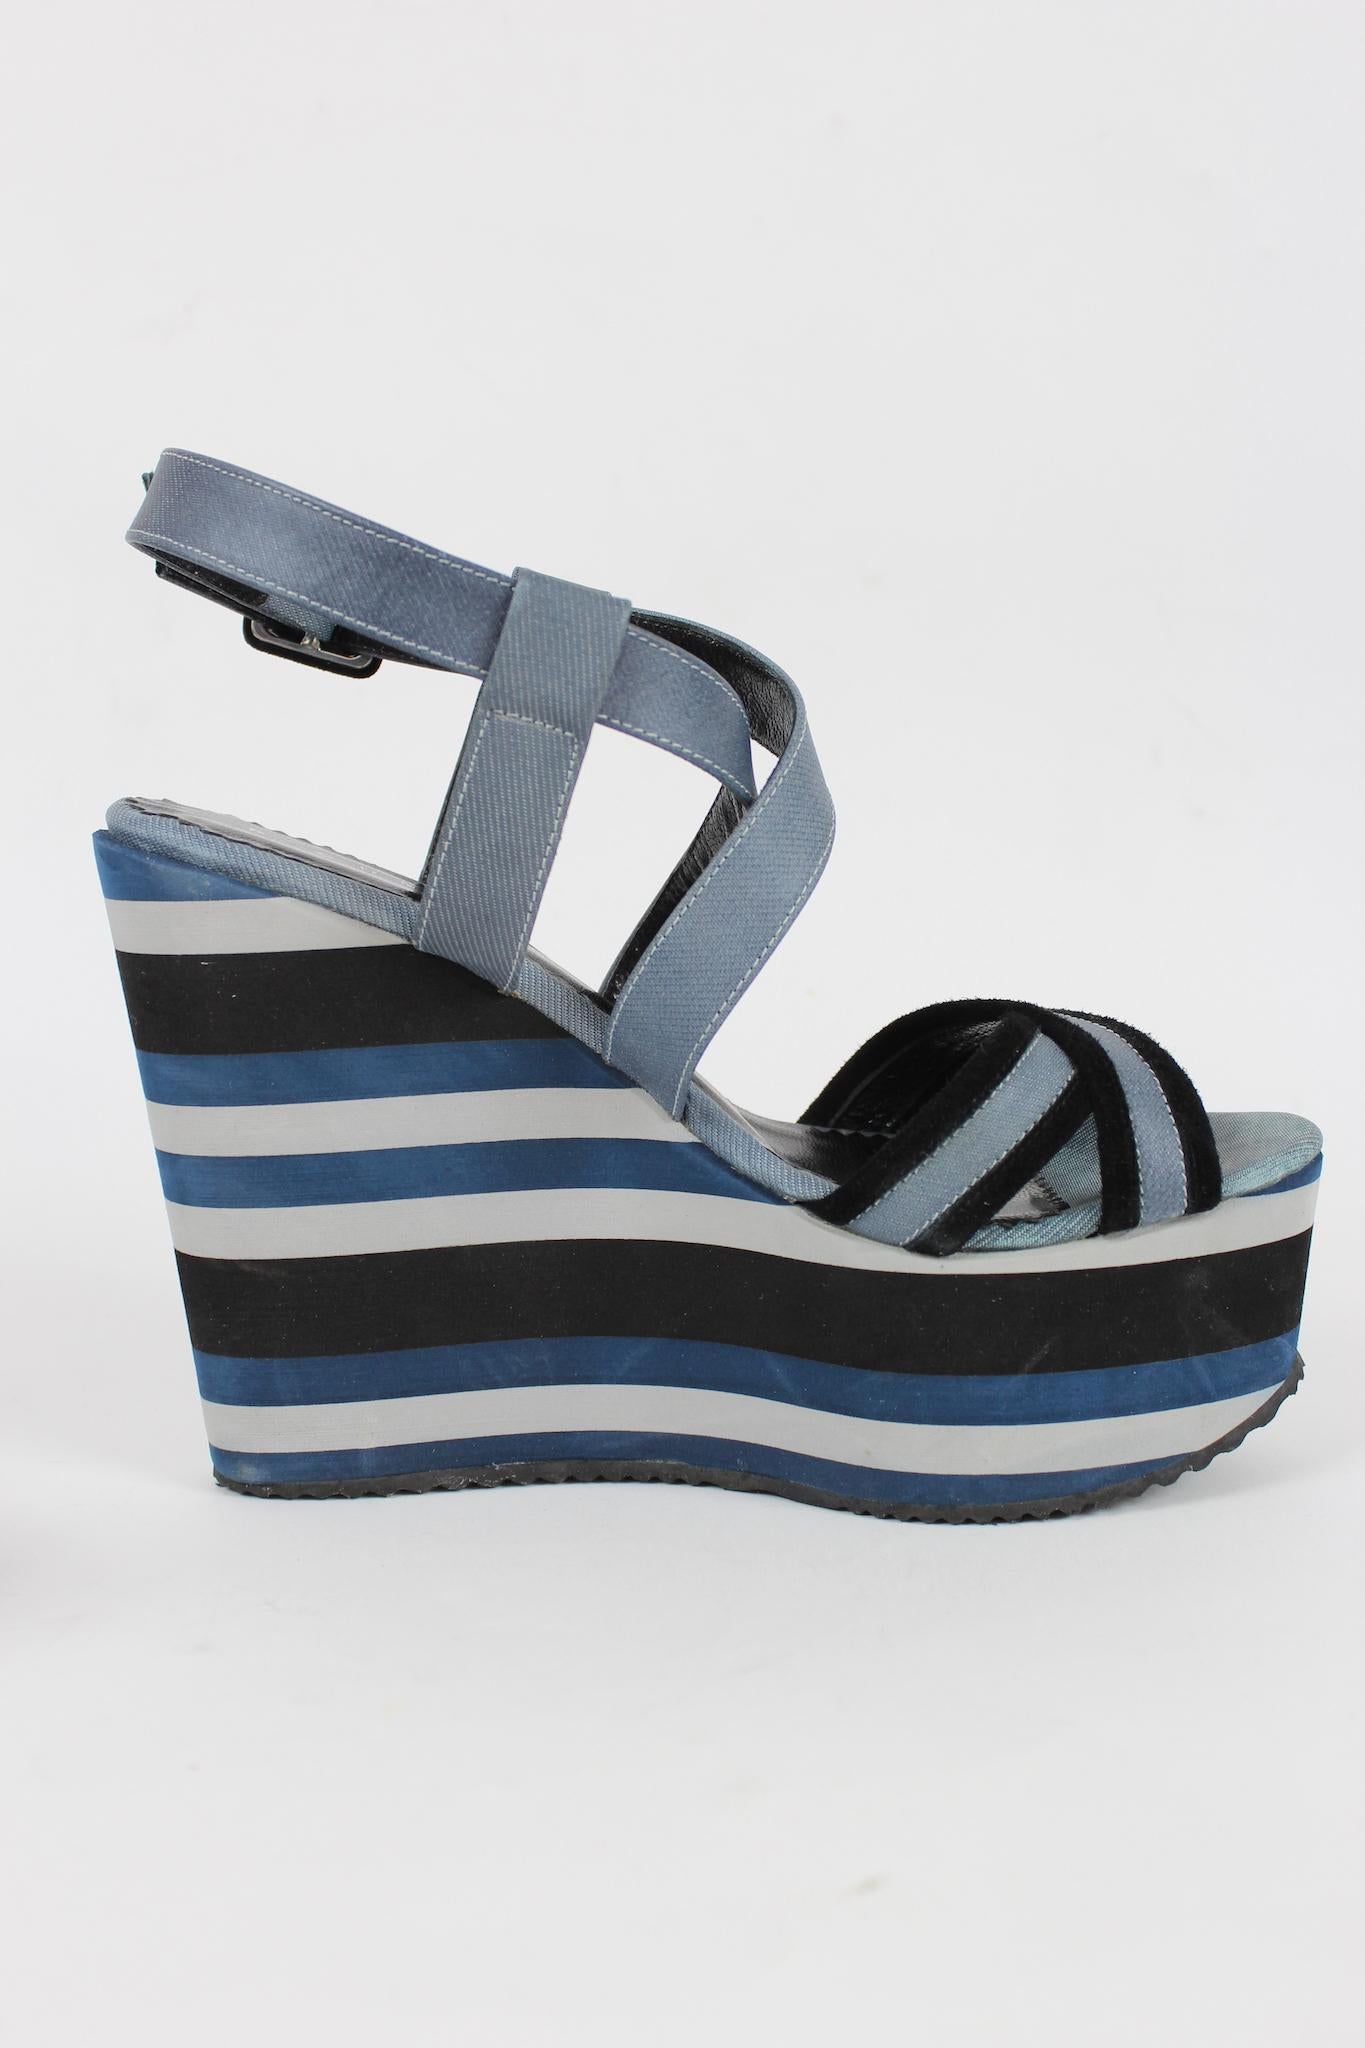 Richmond Blue Black Pinstripe Denim Wedge Shoes In New Condition For Sale In Brindisi, Bt